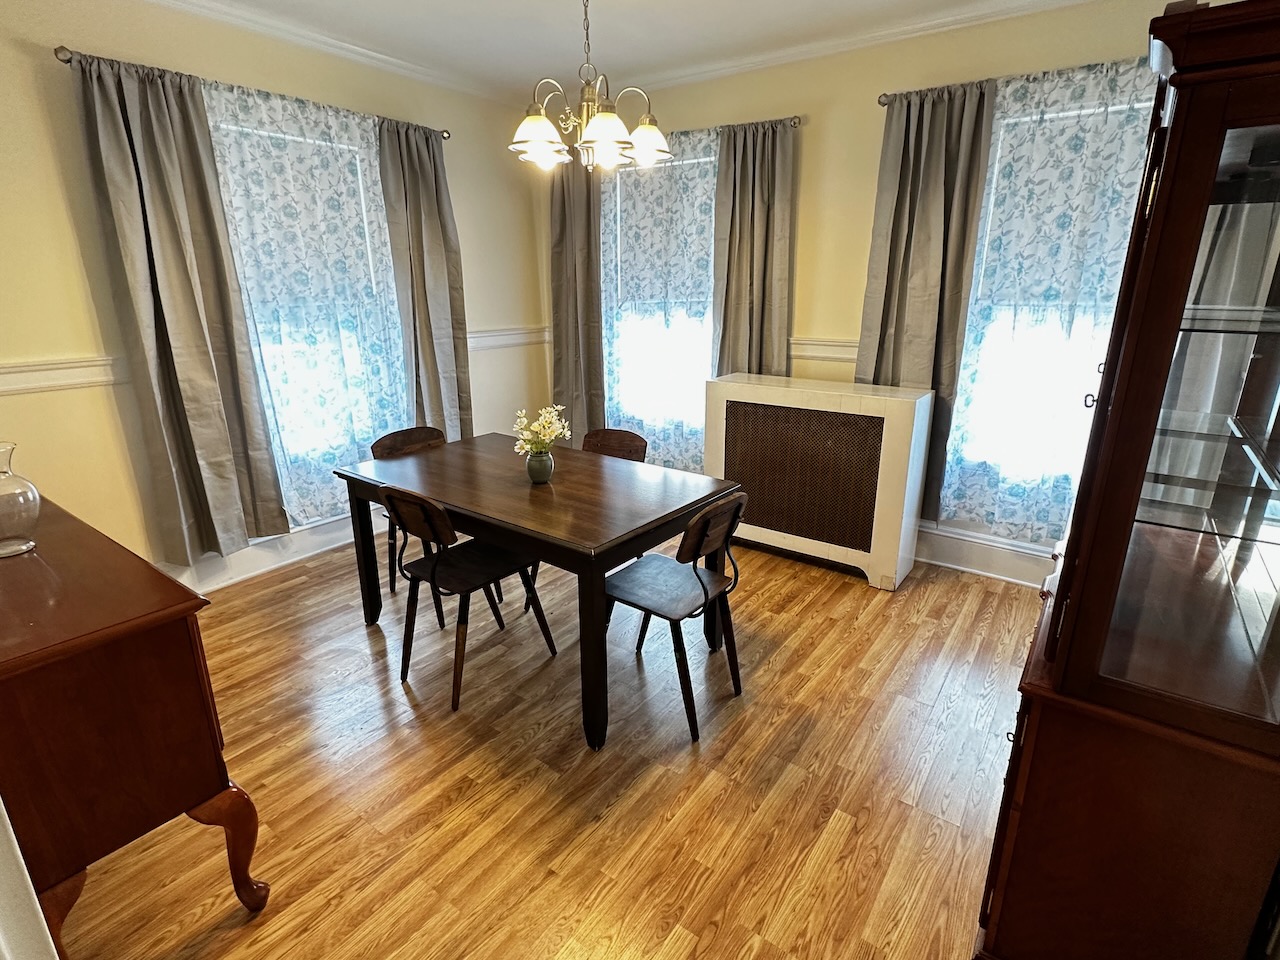 Photos of apartment on Hopedale St.,Boston MA 02134